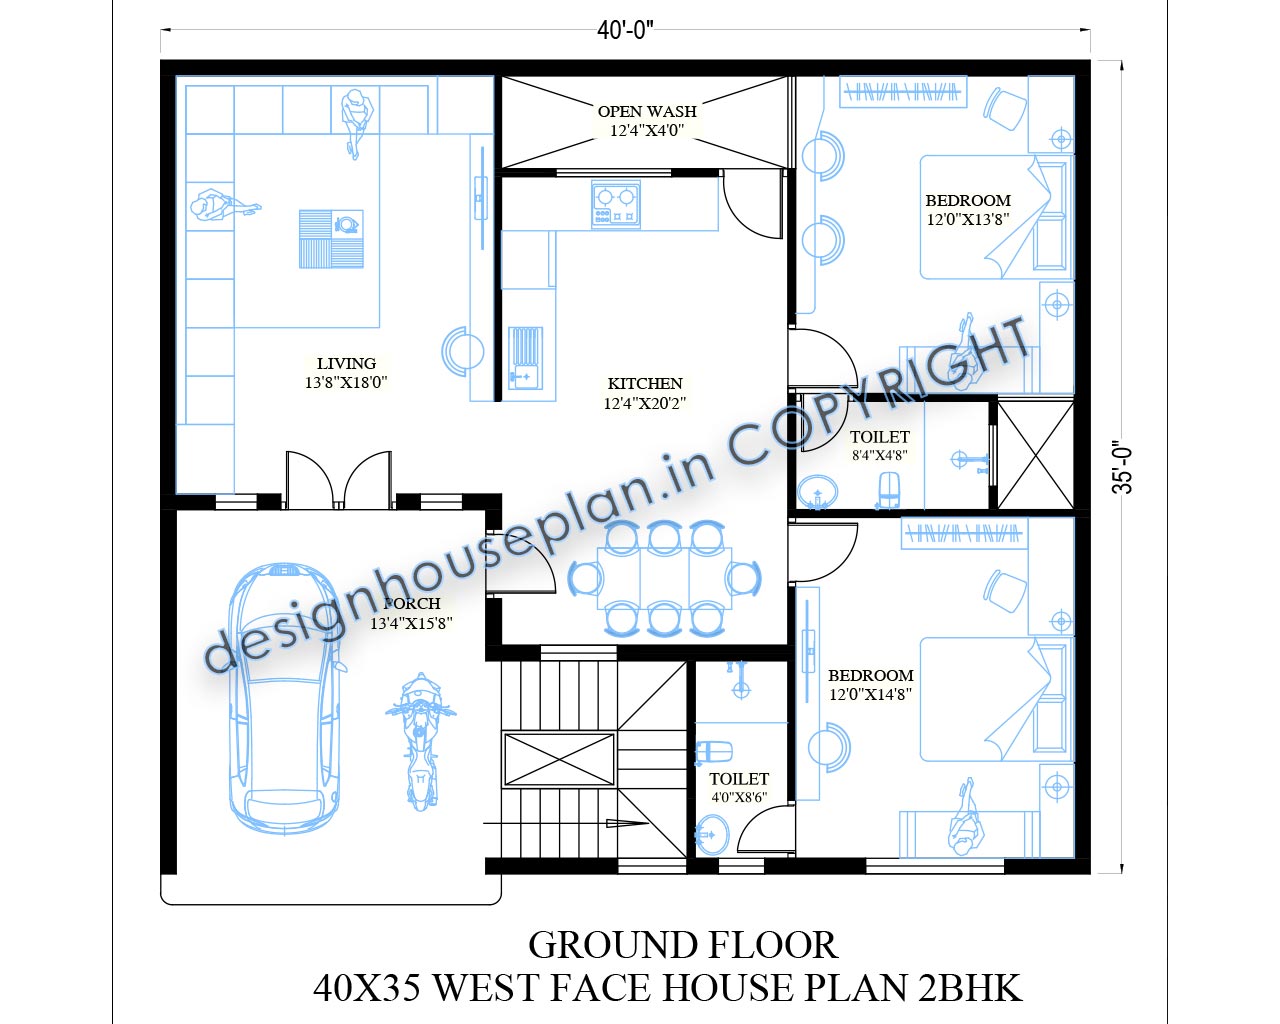 40x35 west facing house plans